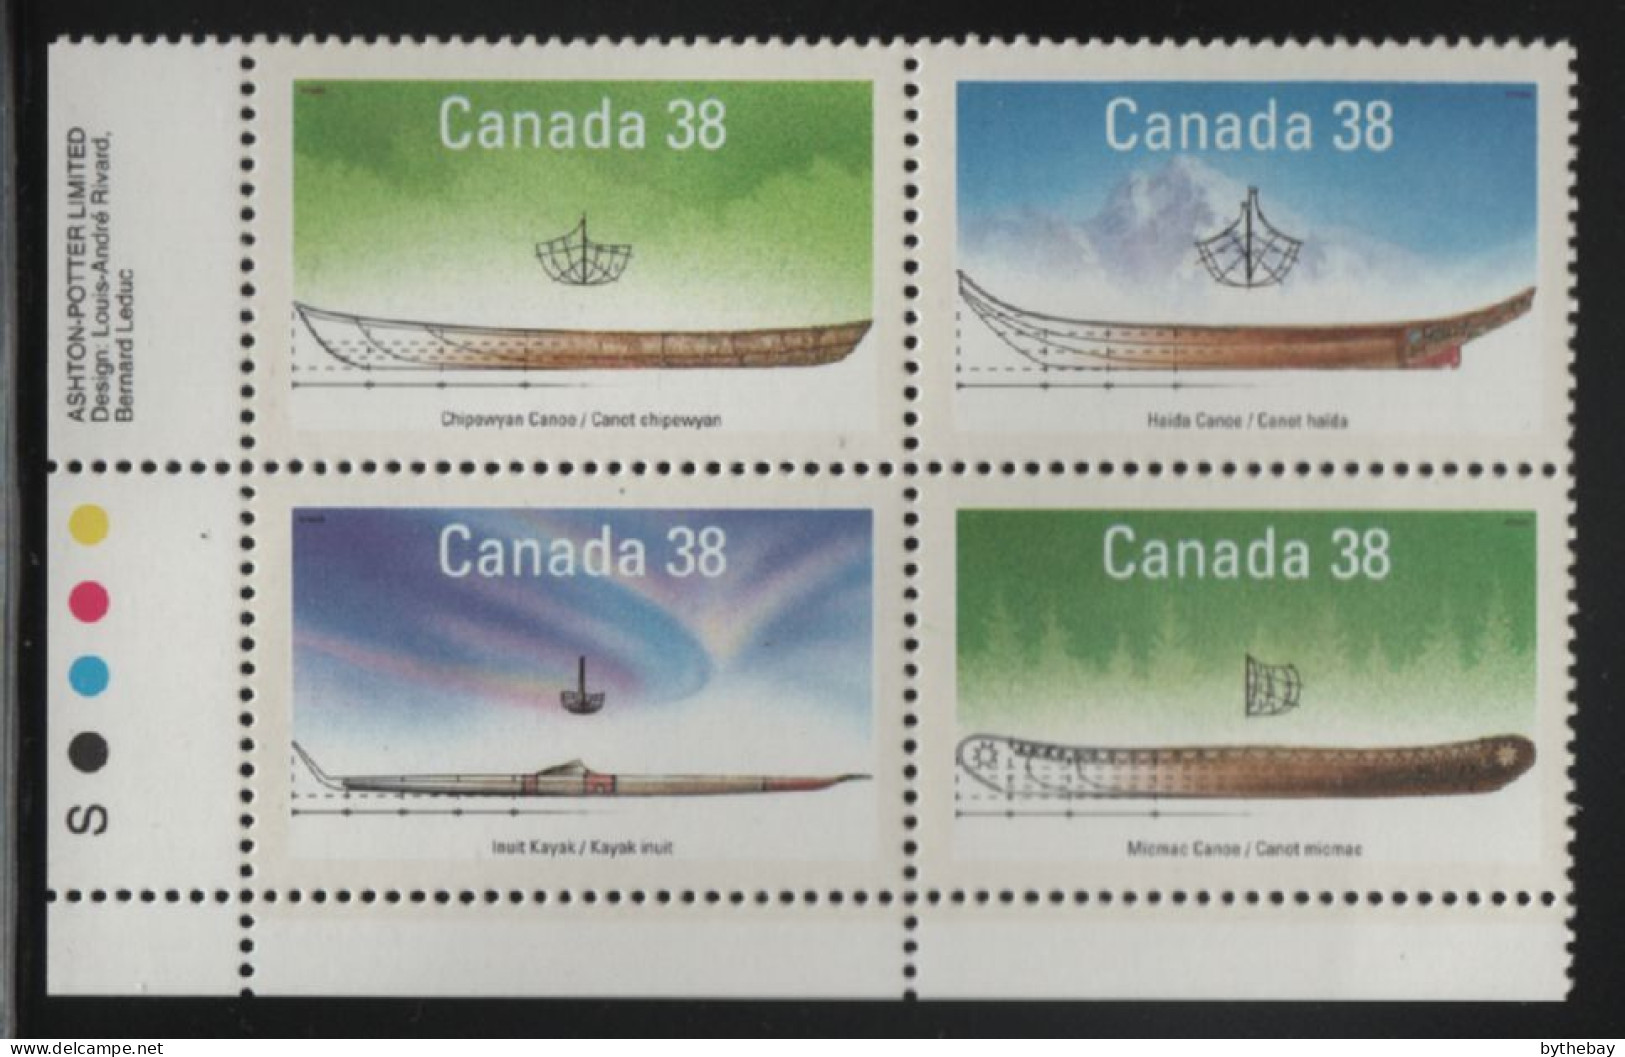 Canada 1989 MNH Sc 1232a 38c Native Boats LL Plate Block - Num. Planches & Inscriptions Marge